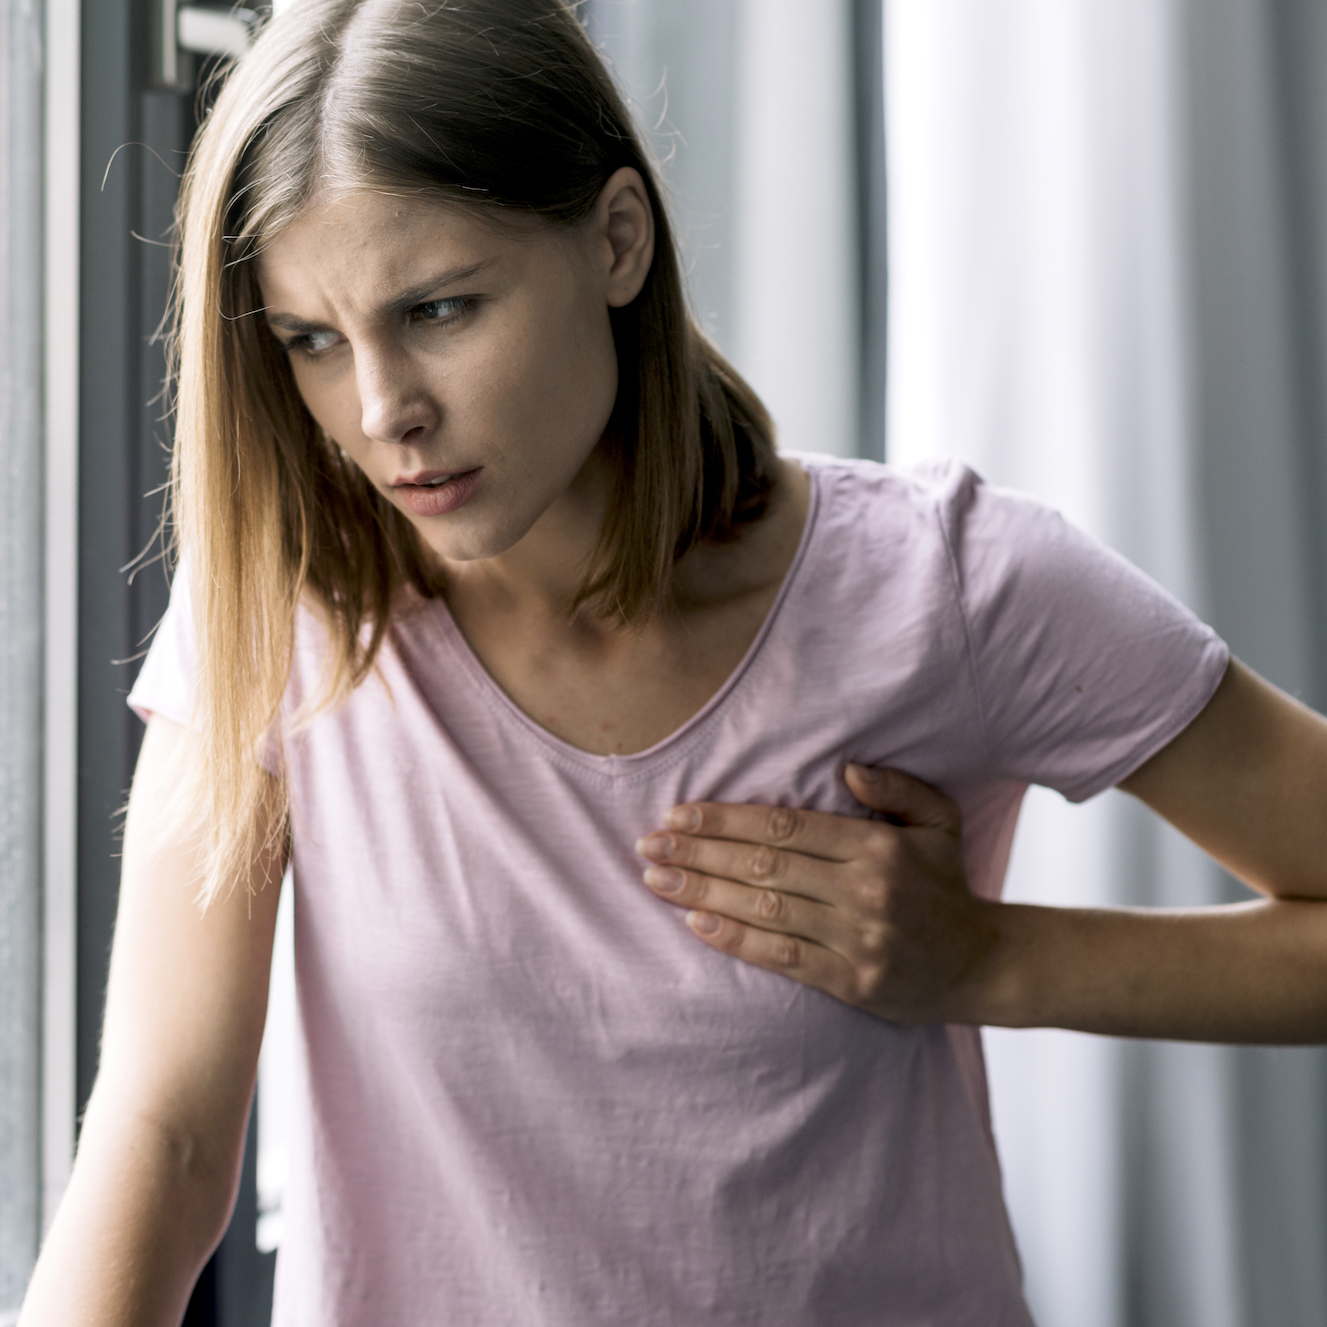 Woman experience chest pain on breast